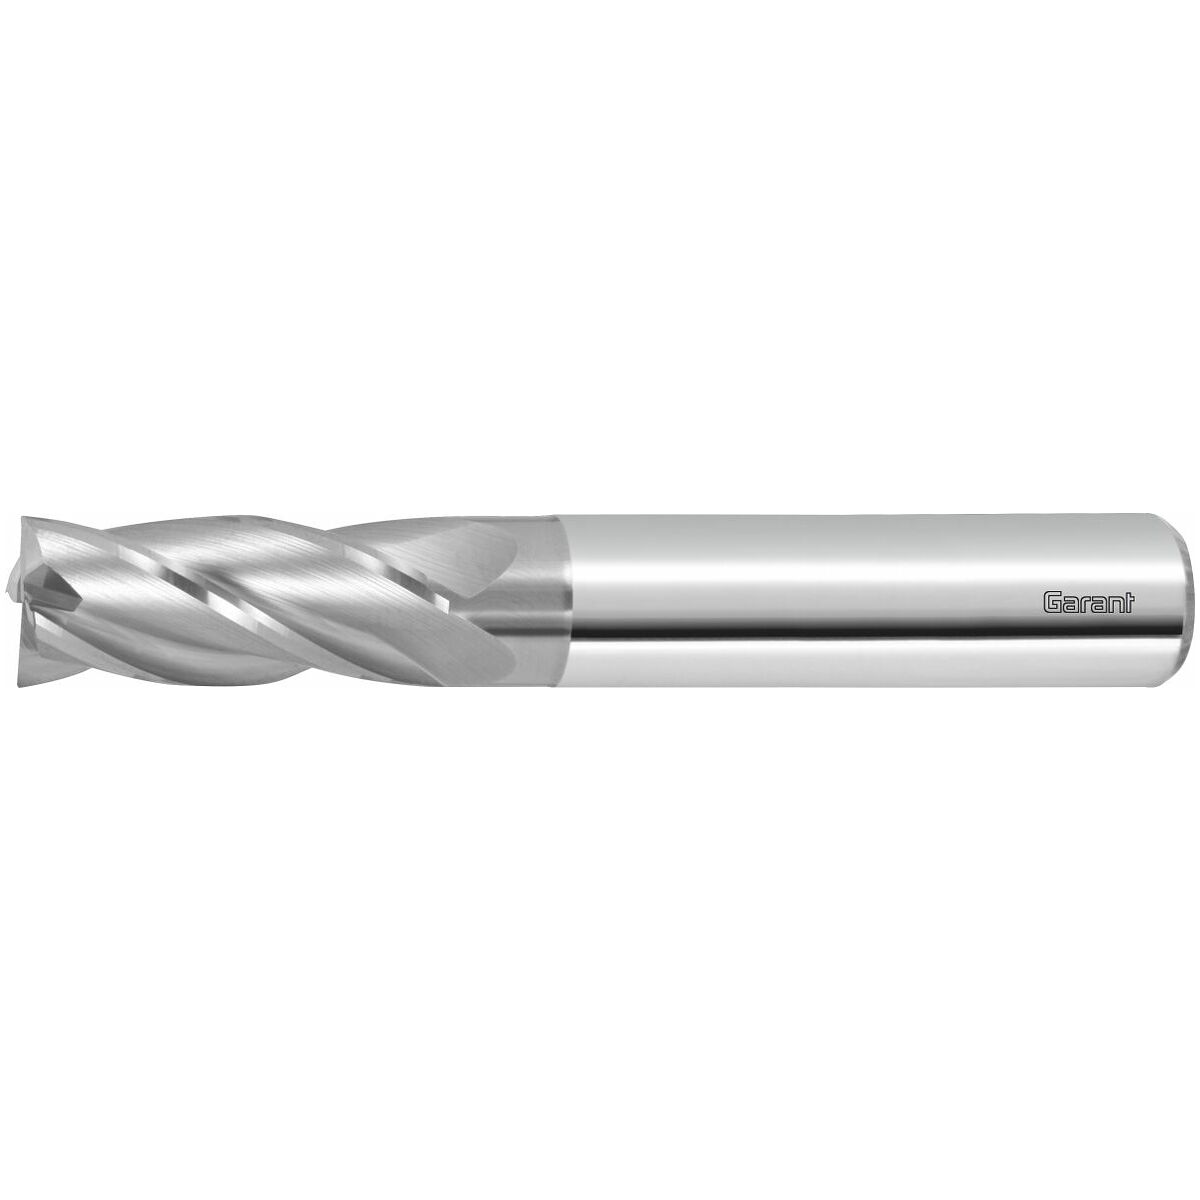 Europa Tool Solid Carbide 2 Flute Slot Drills 25mm TiAlN Coated.All Sizes 1mm